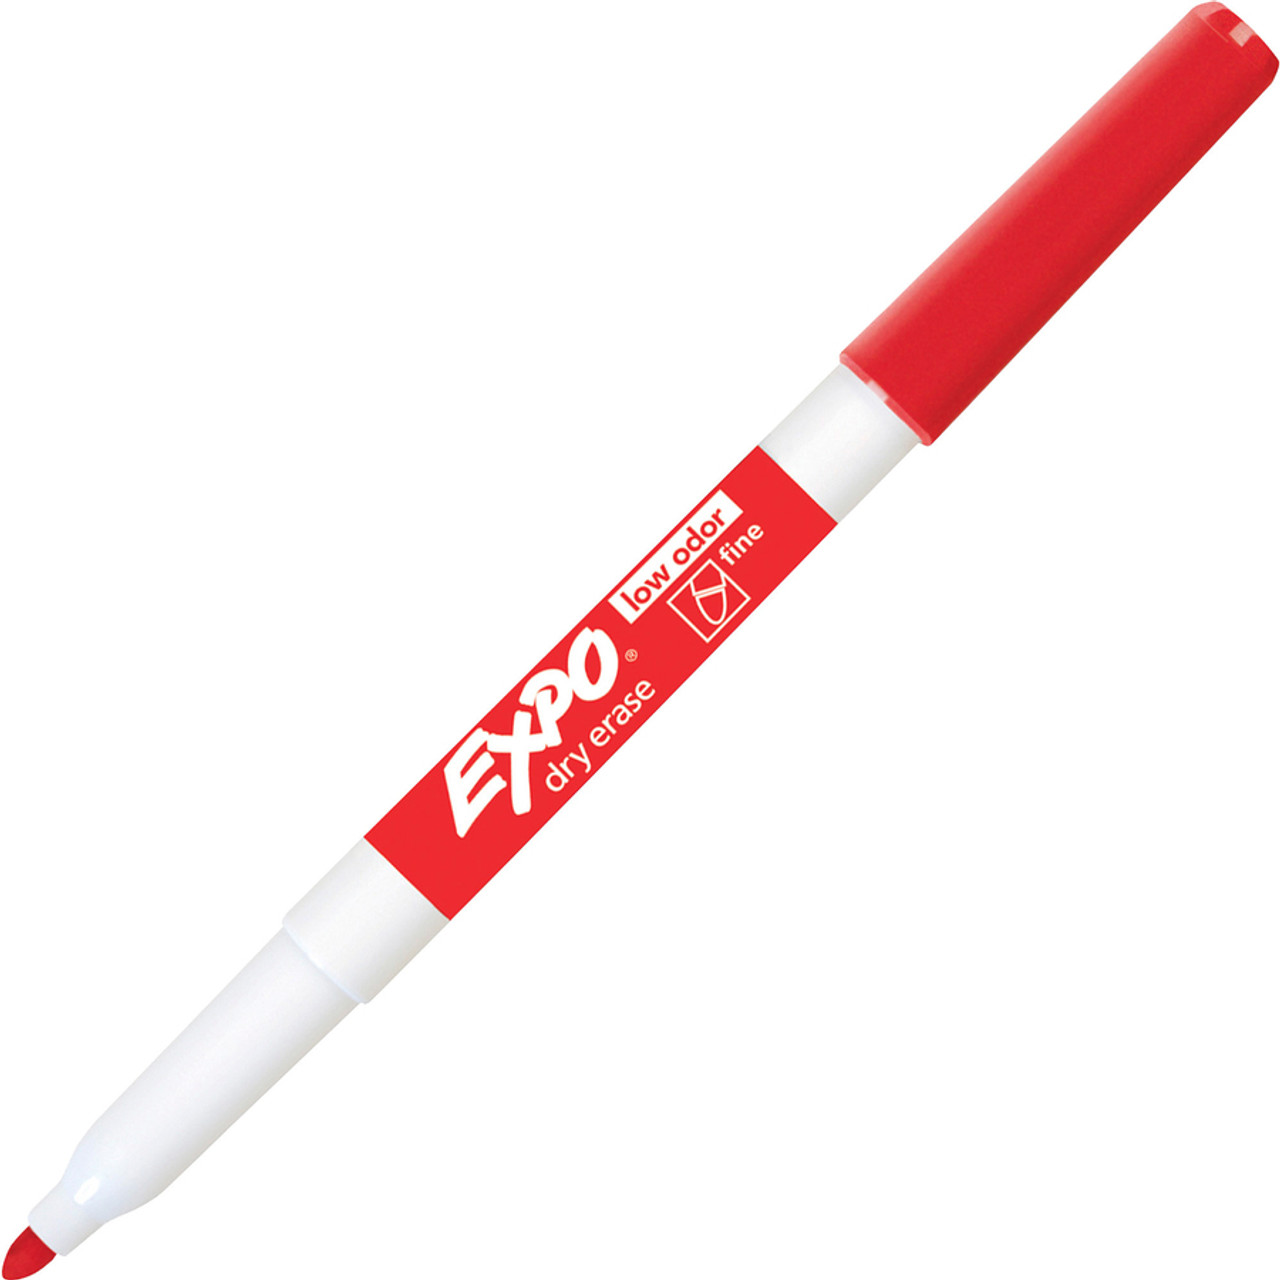 Expo - marker - assorted colors (pack of 16) - 81045